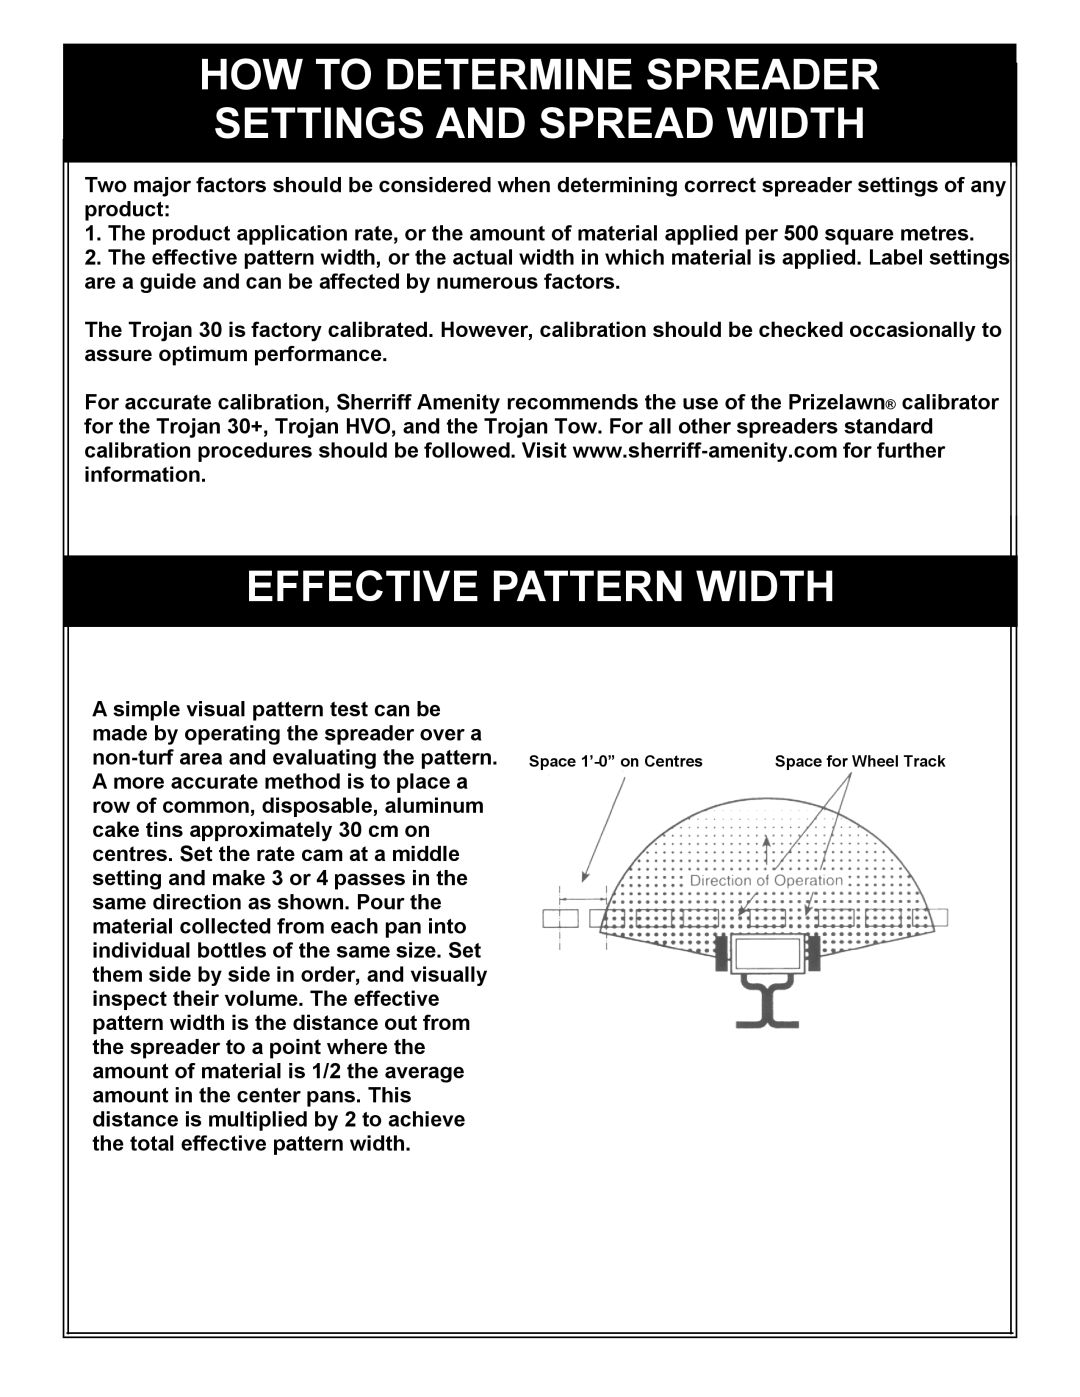 Trojan 30 owner manual How To Determine Spreader, Settings And Spread Width, Effective Pattern Width 